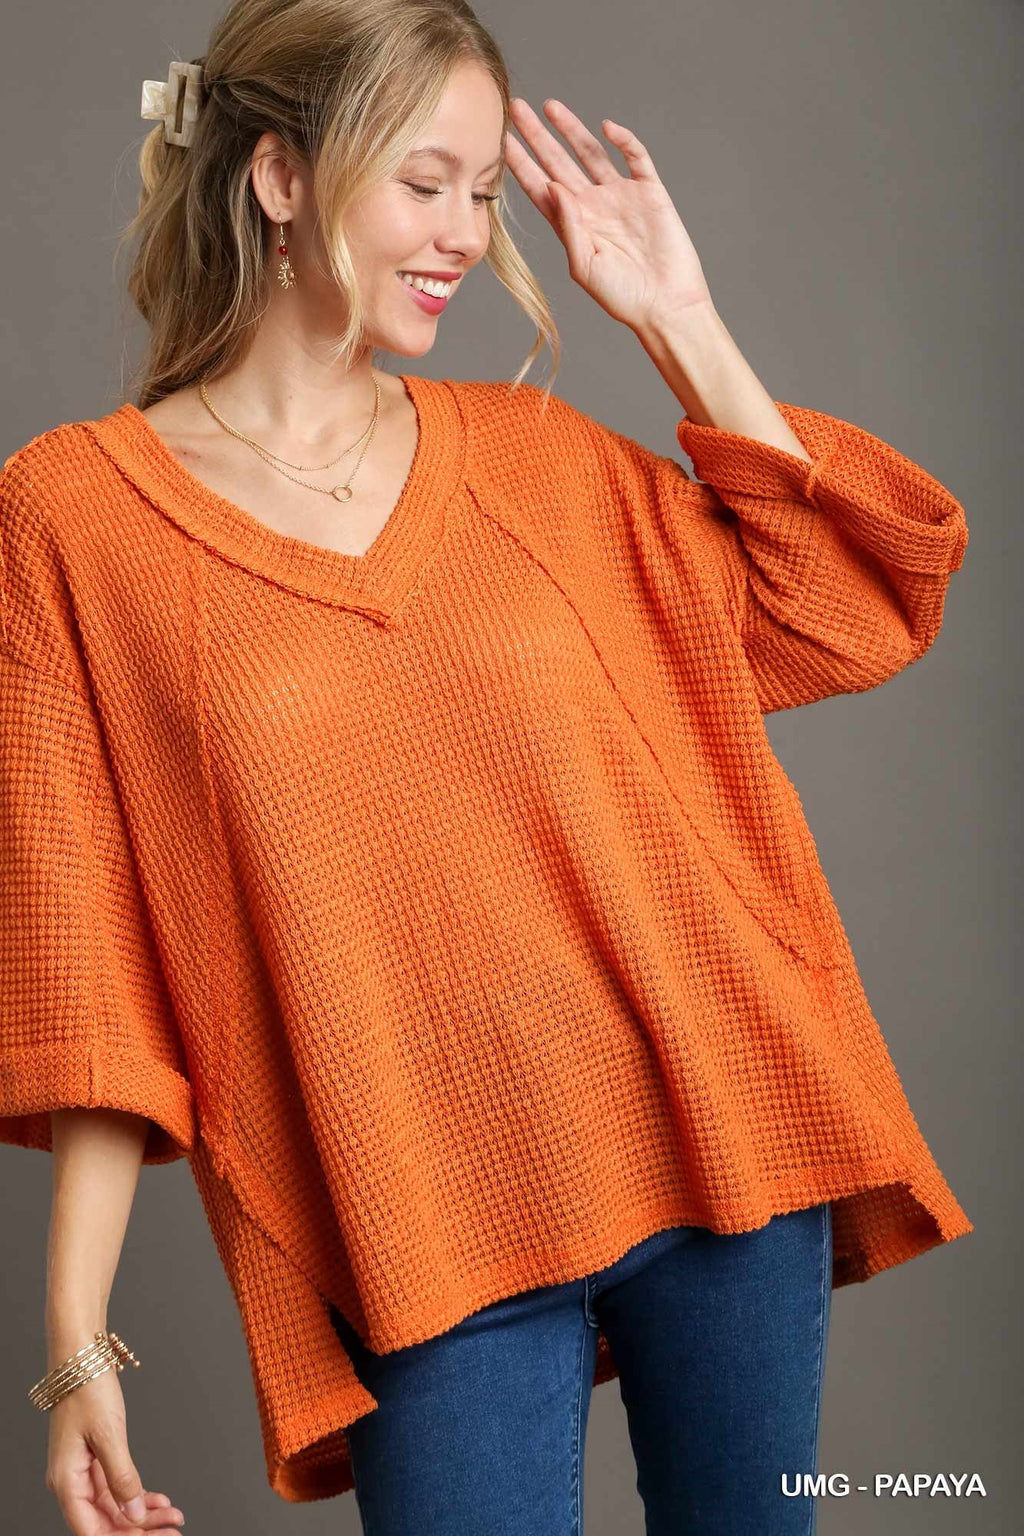 Boxy Cut V-Neck Top With Fray Details